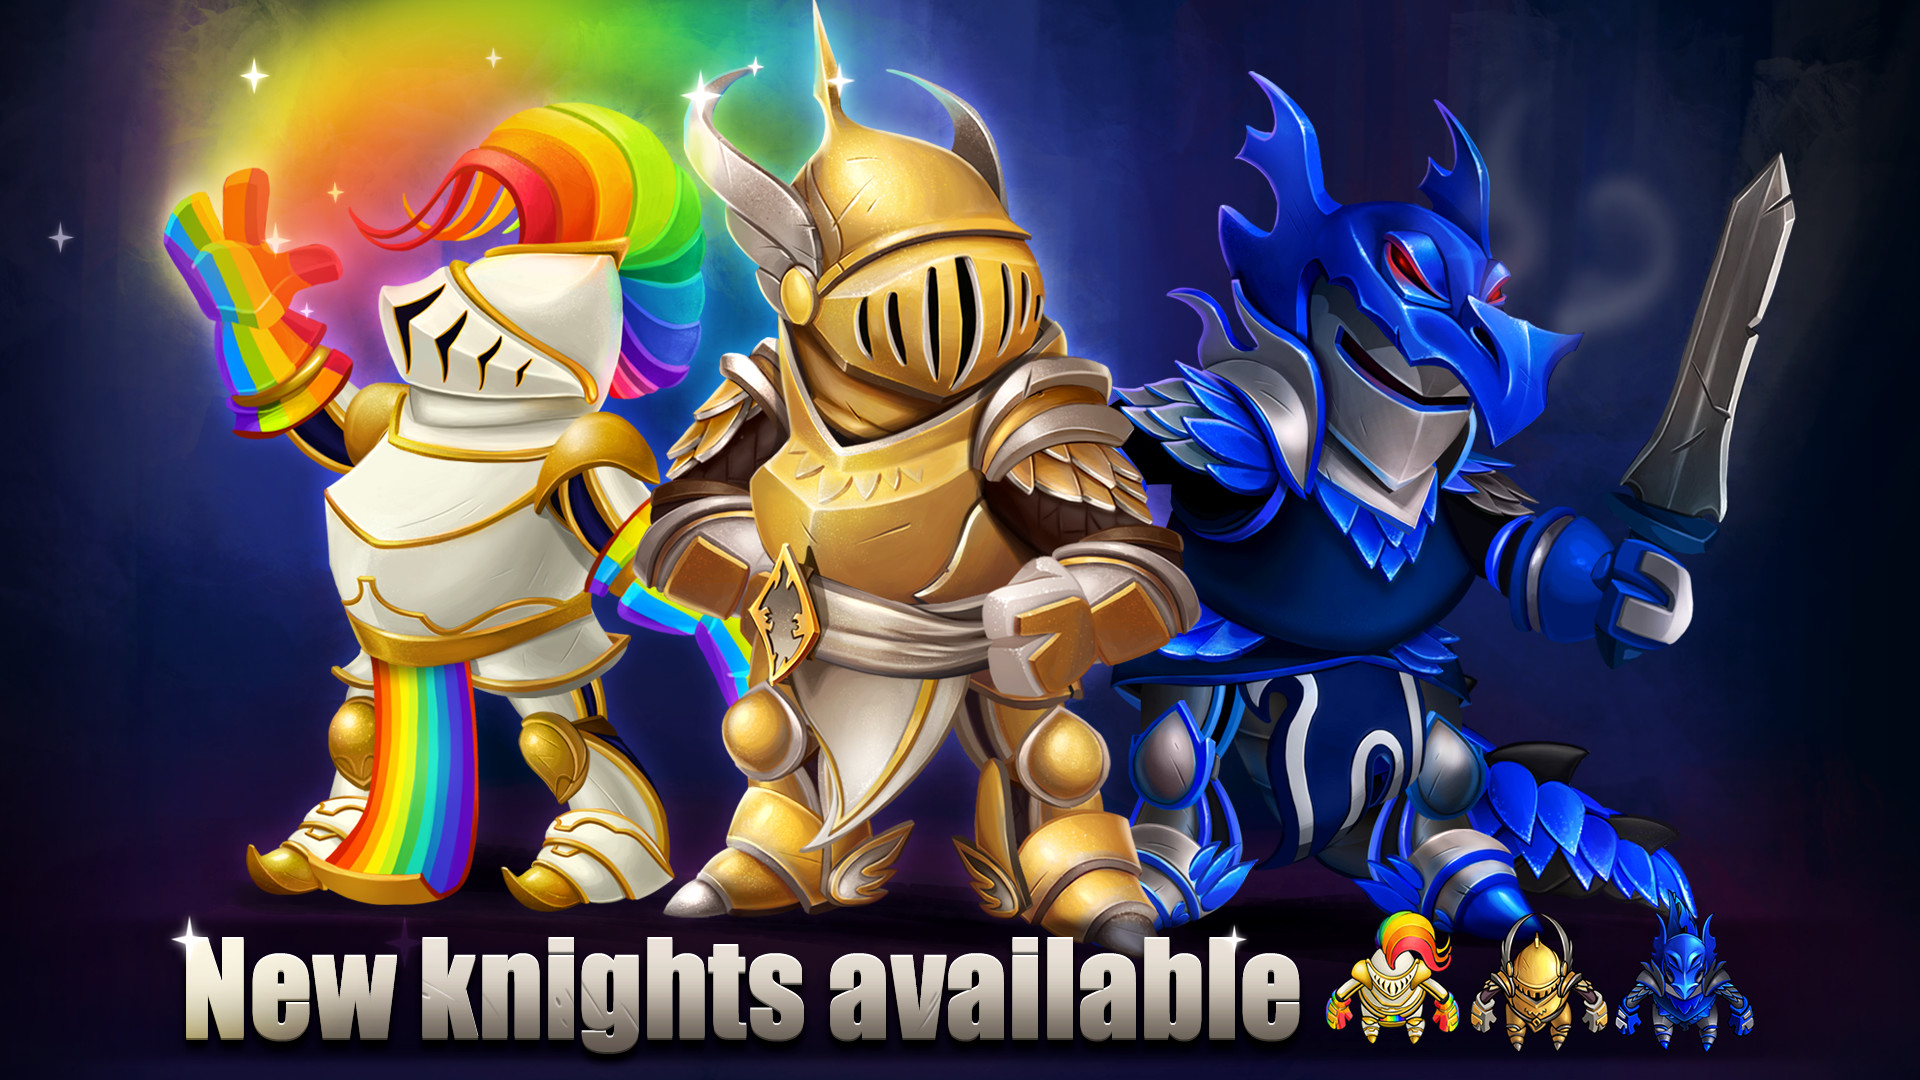 Knight Squad - Extra Chivalrous Featured Screenshot #1